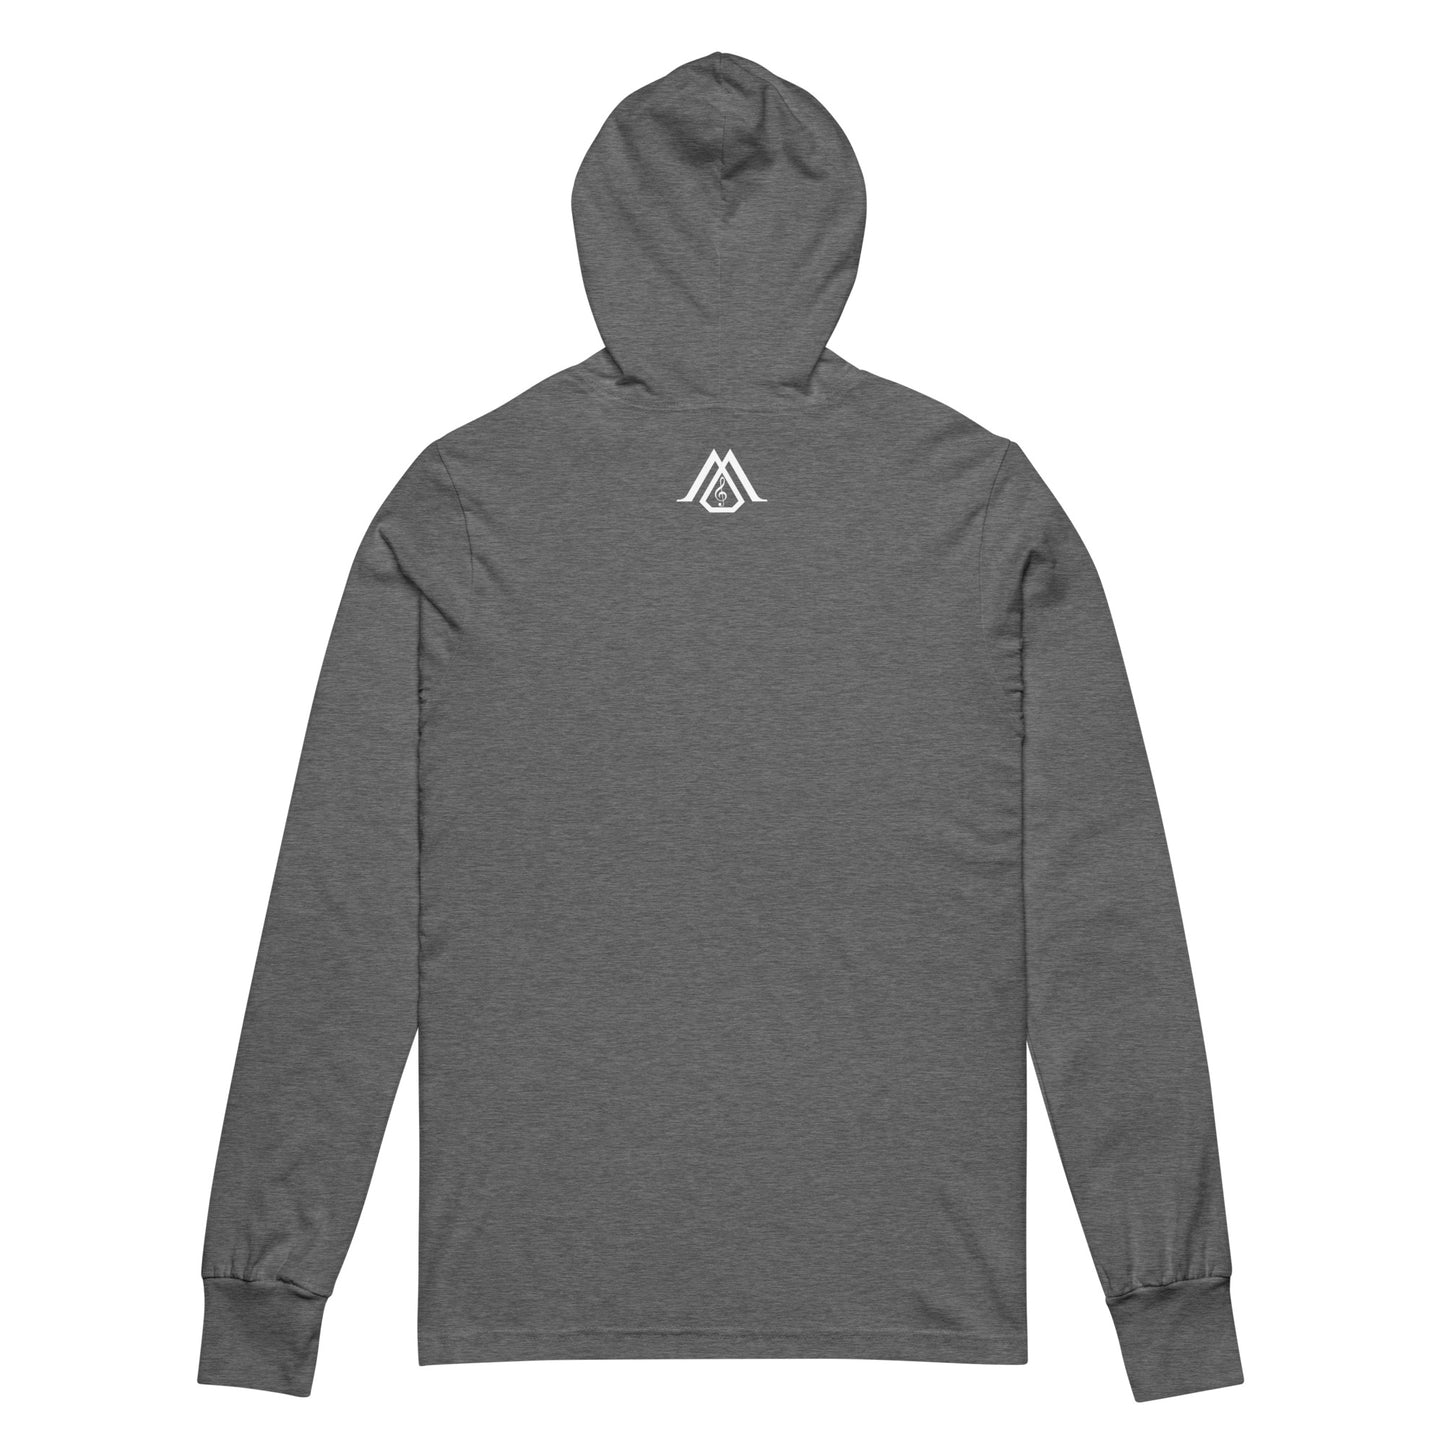 Authentic ME lightweight Hooded long-sleeve tee